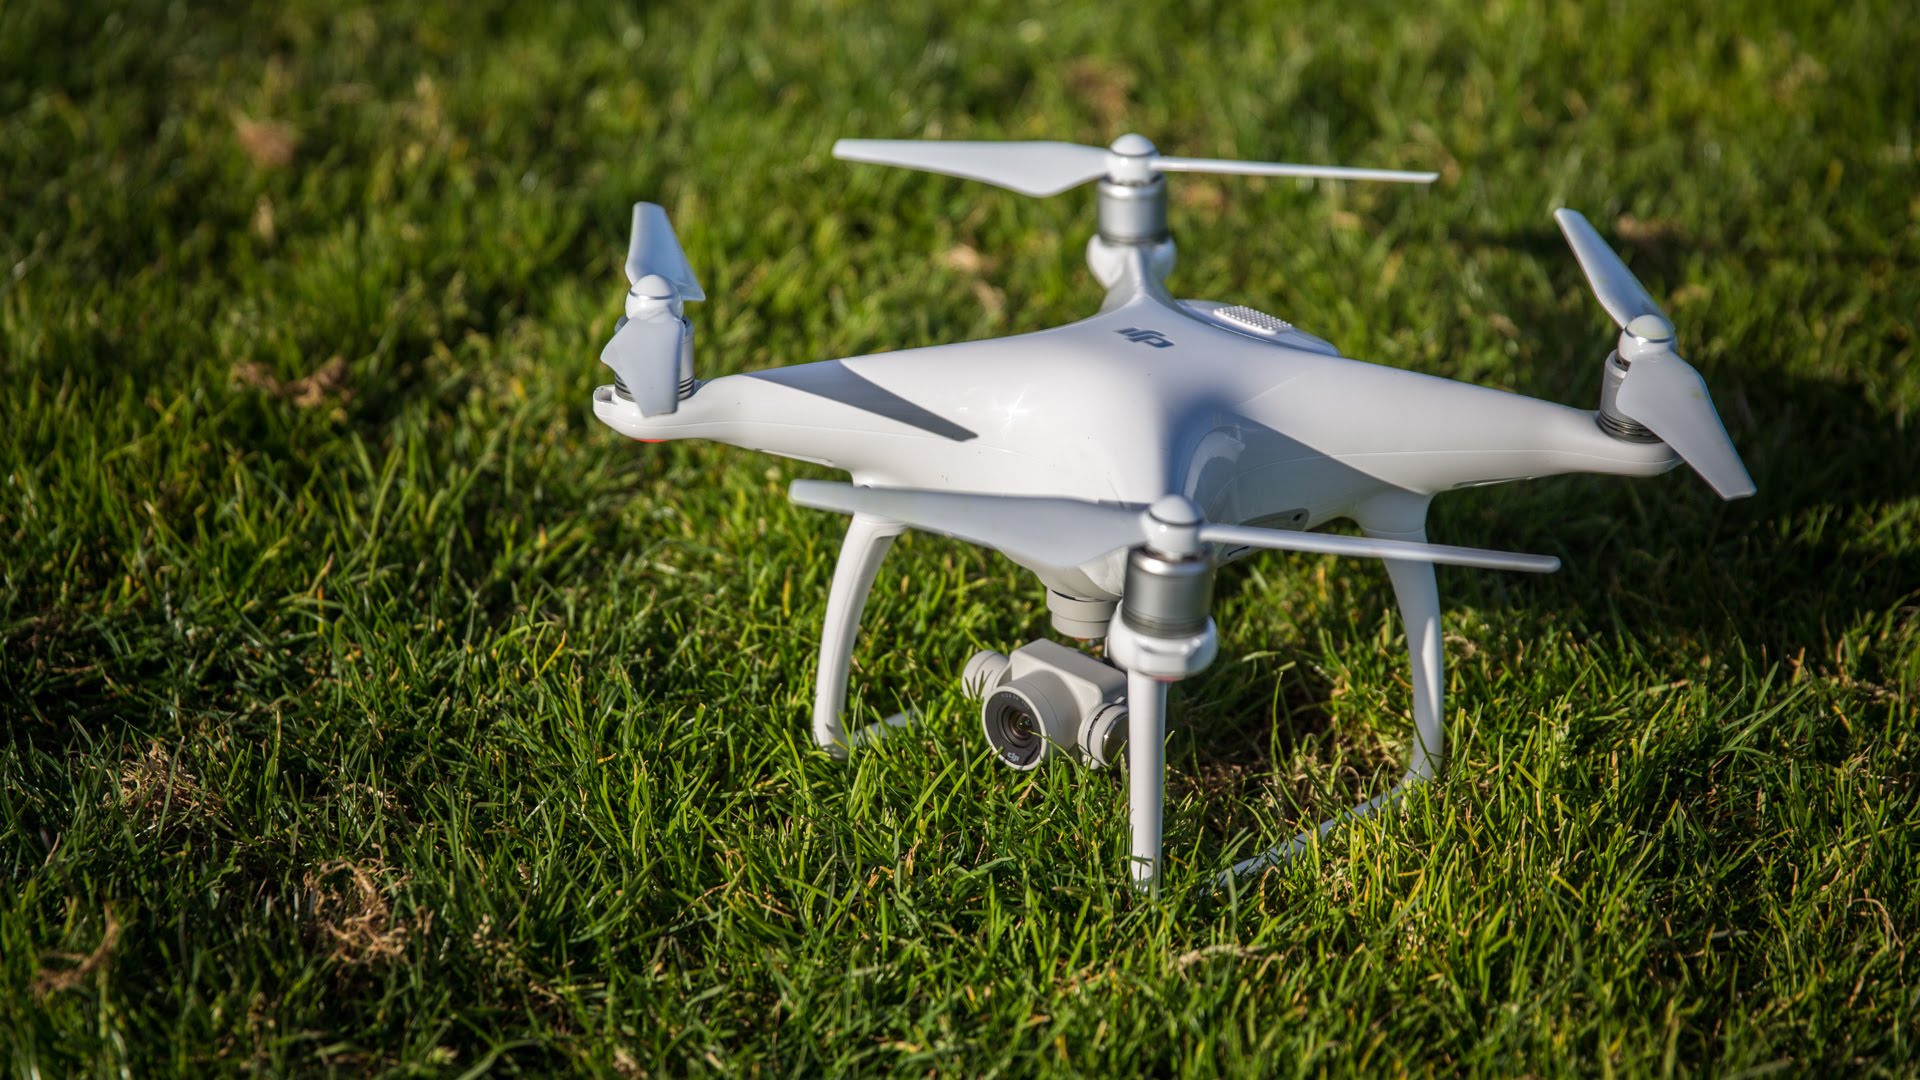 Hands-On with DJI’s Phantom 4 Quadcopter Drone!